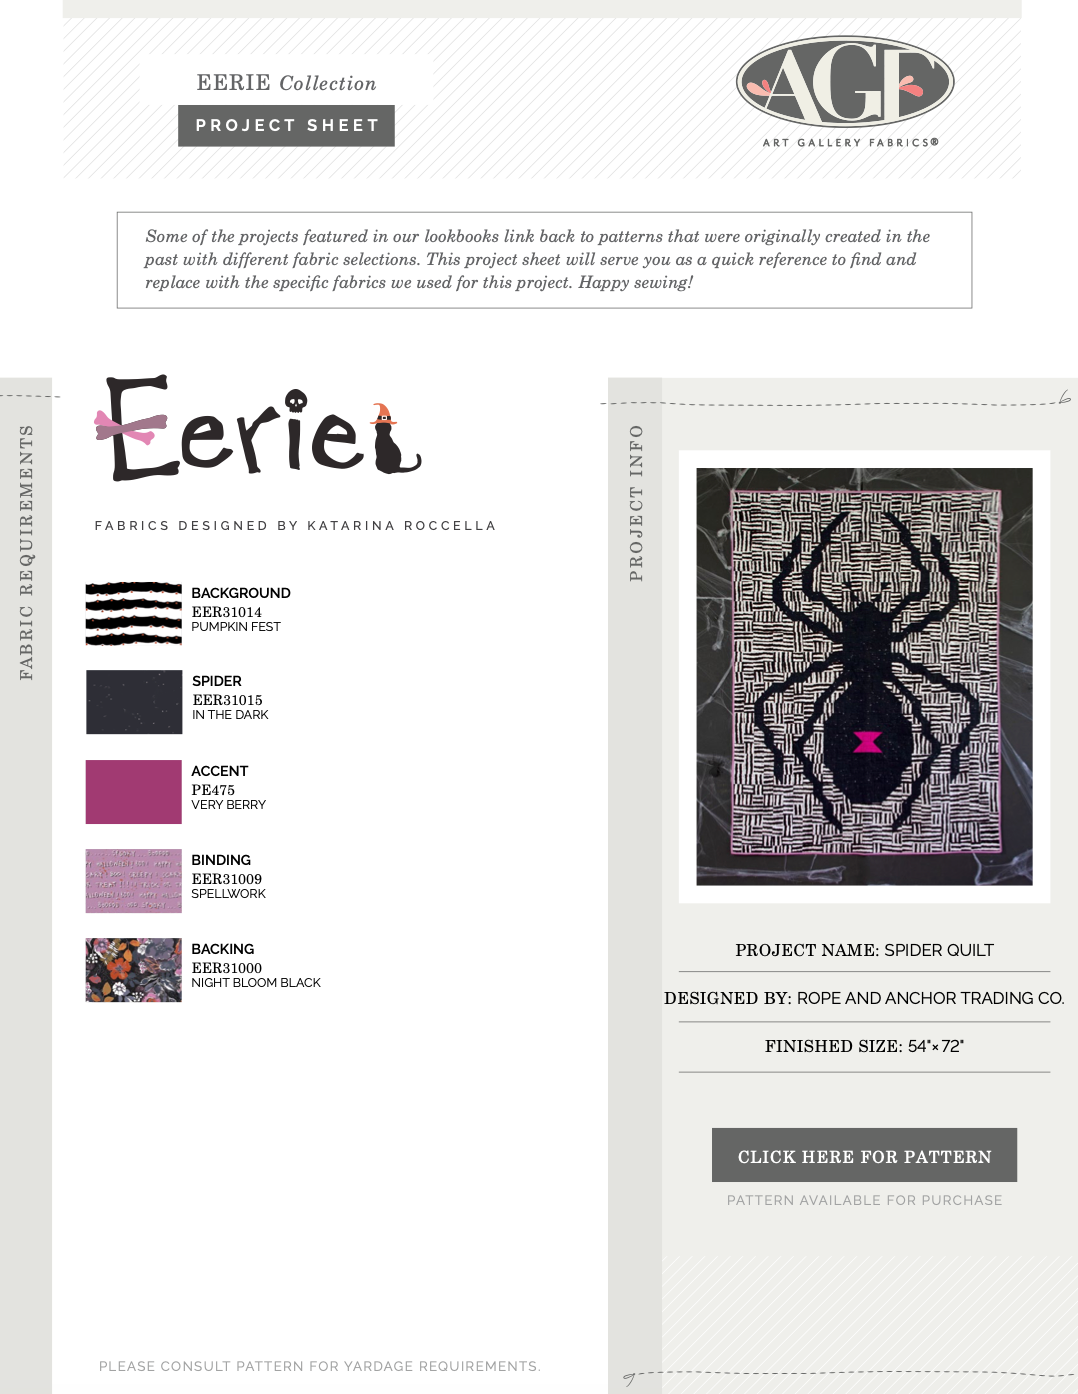 Eerie by Katarina Roccella - Spider Quilt Kit